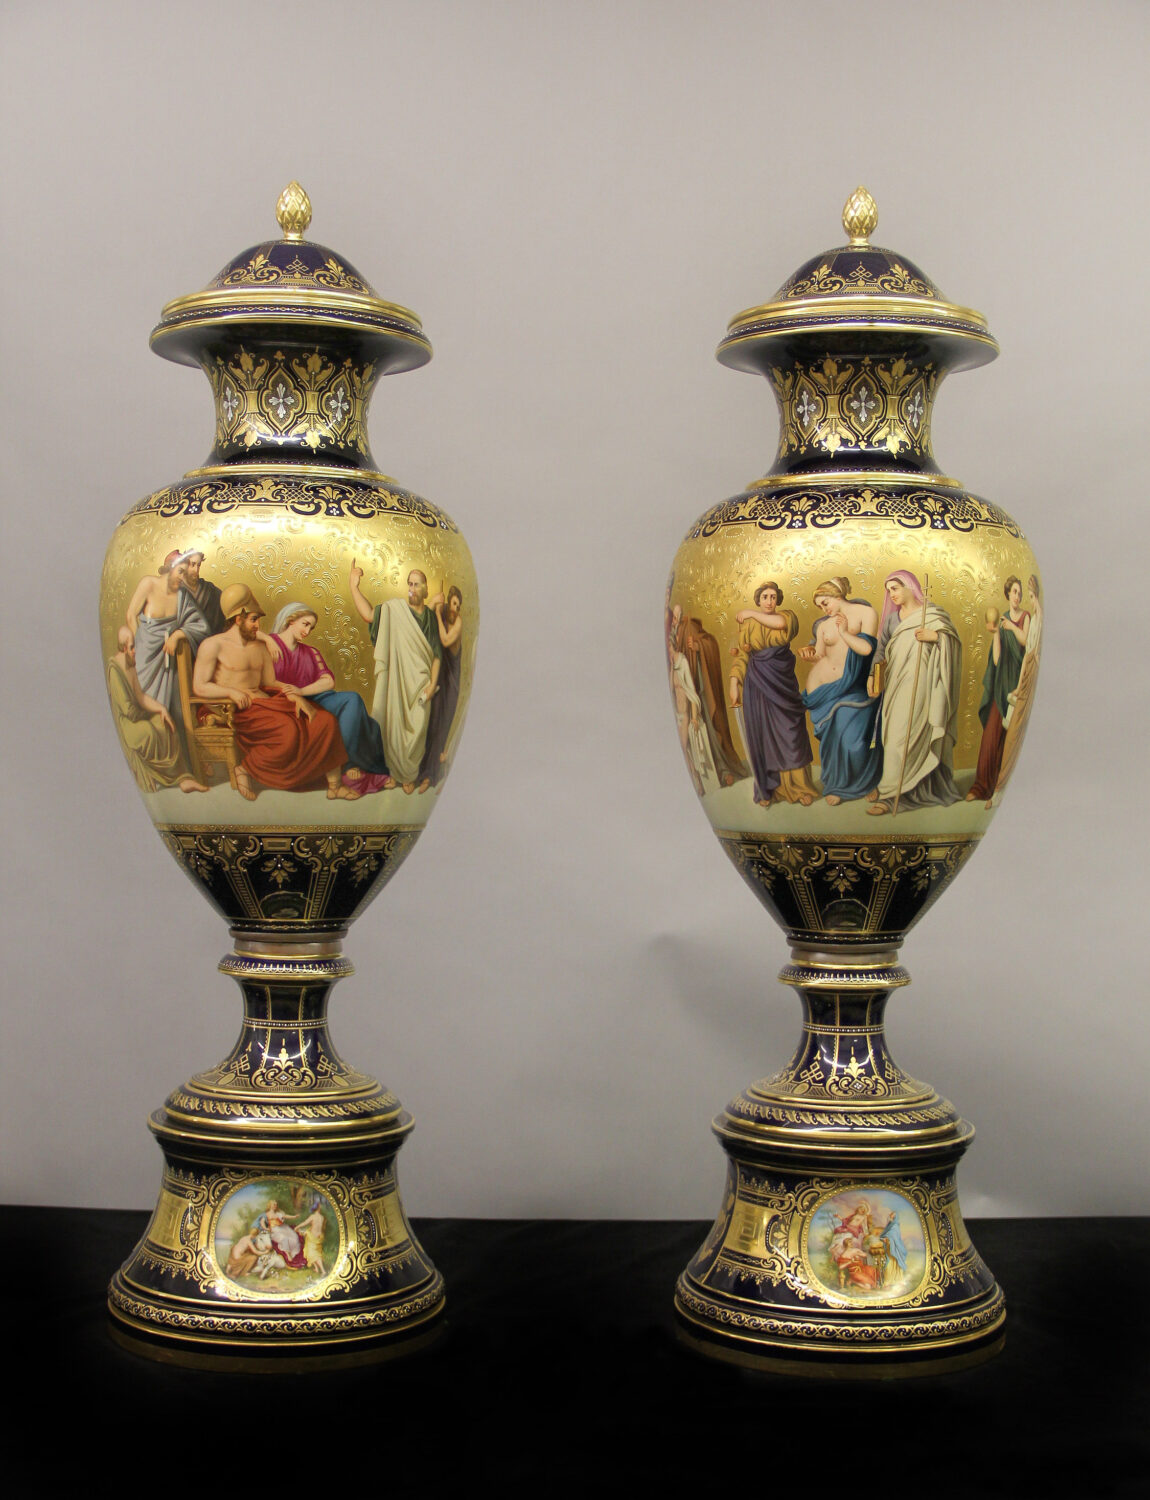 Pair of late 19th century Exhibition royal Vienna Porcelain vases and covers.